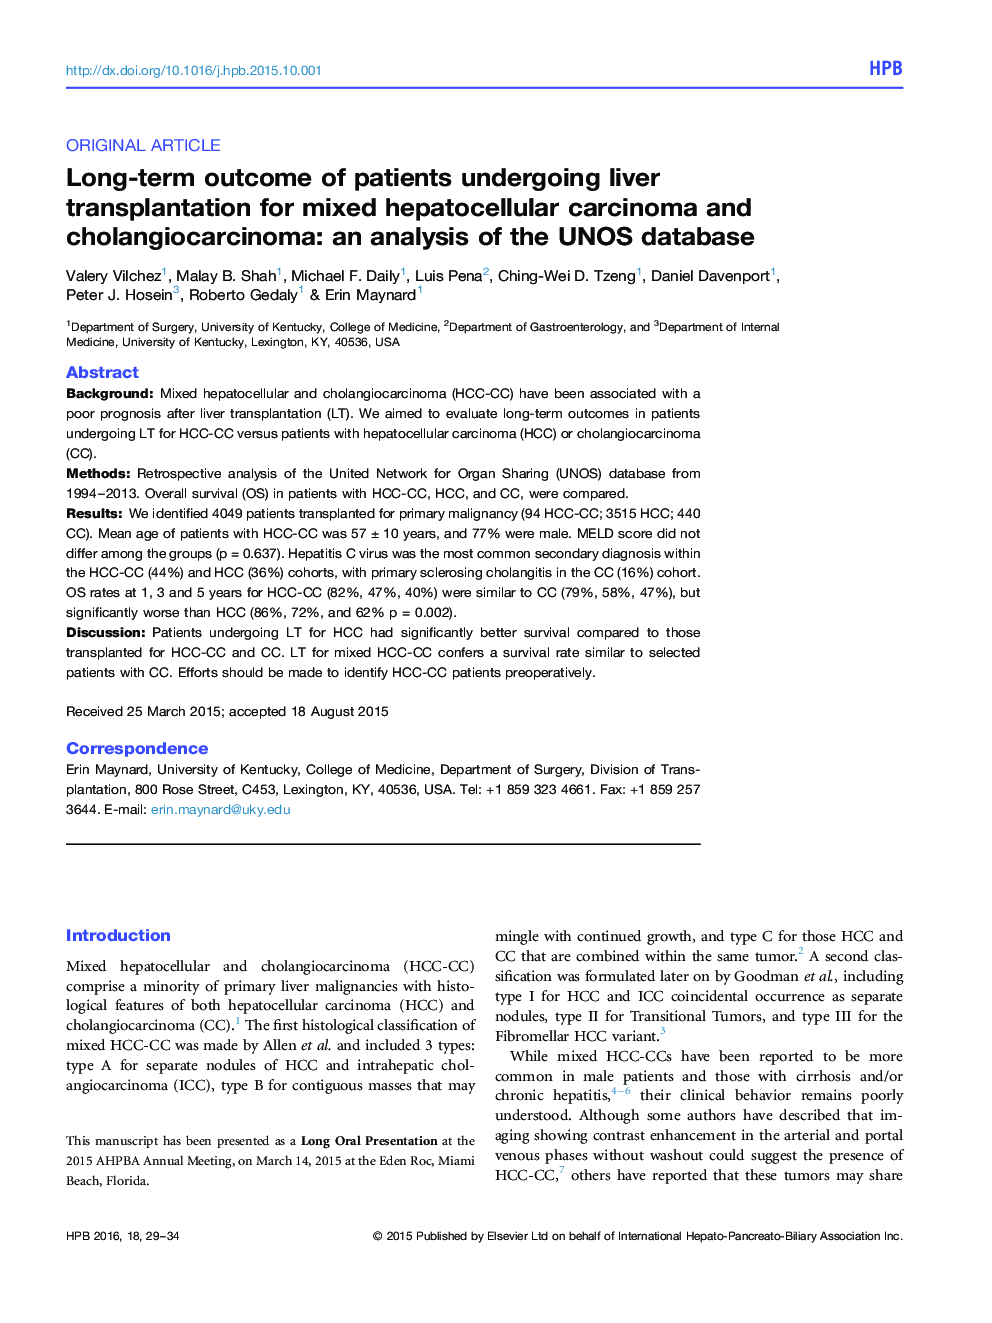 Long-term outcome of patients undergoing liver transplantation for mixed hepatocellular carcinoma and cholangiocarcinoma: an analysis of the UNOS database